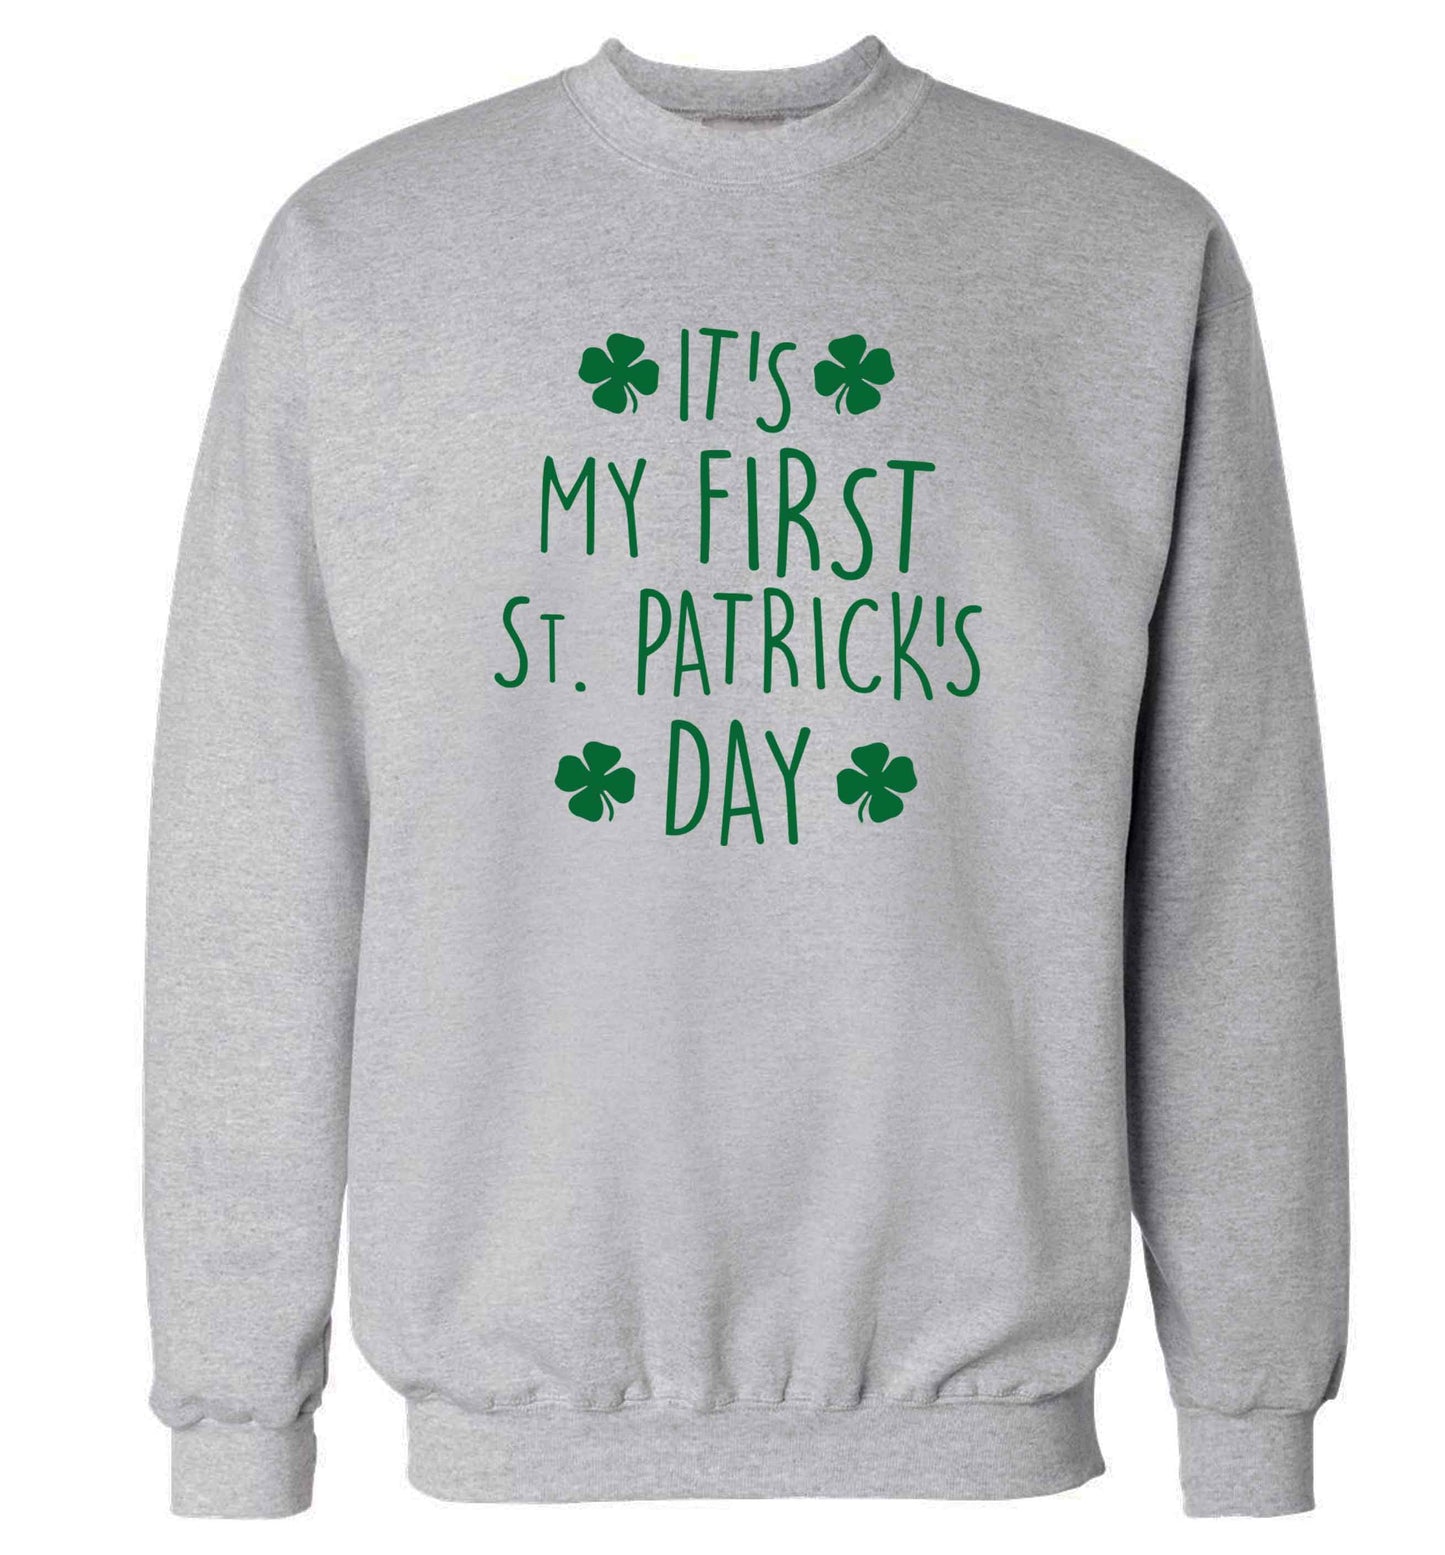 It's my first St.Patrick's day adult's unisex grey sweater 2XL